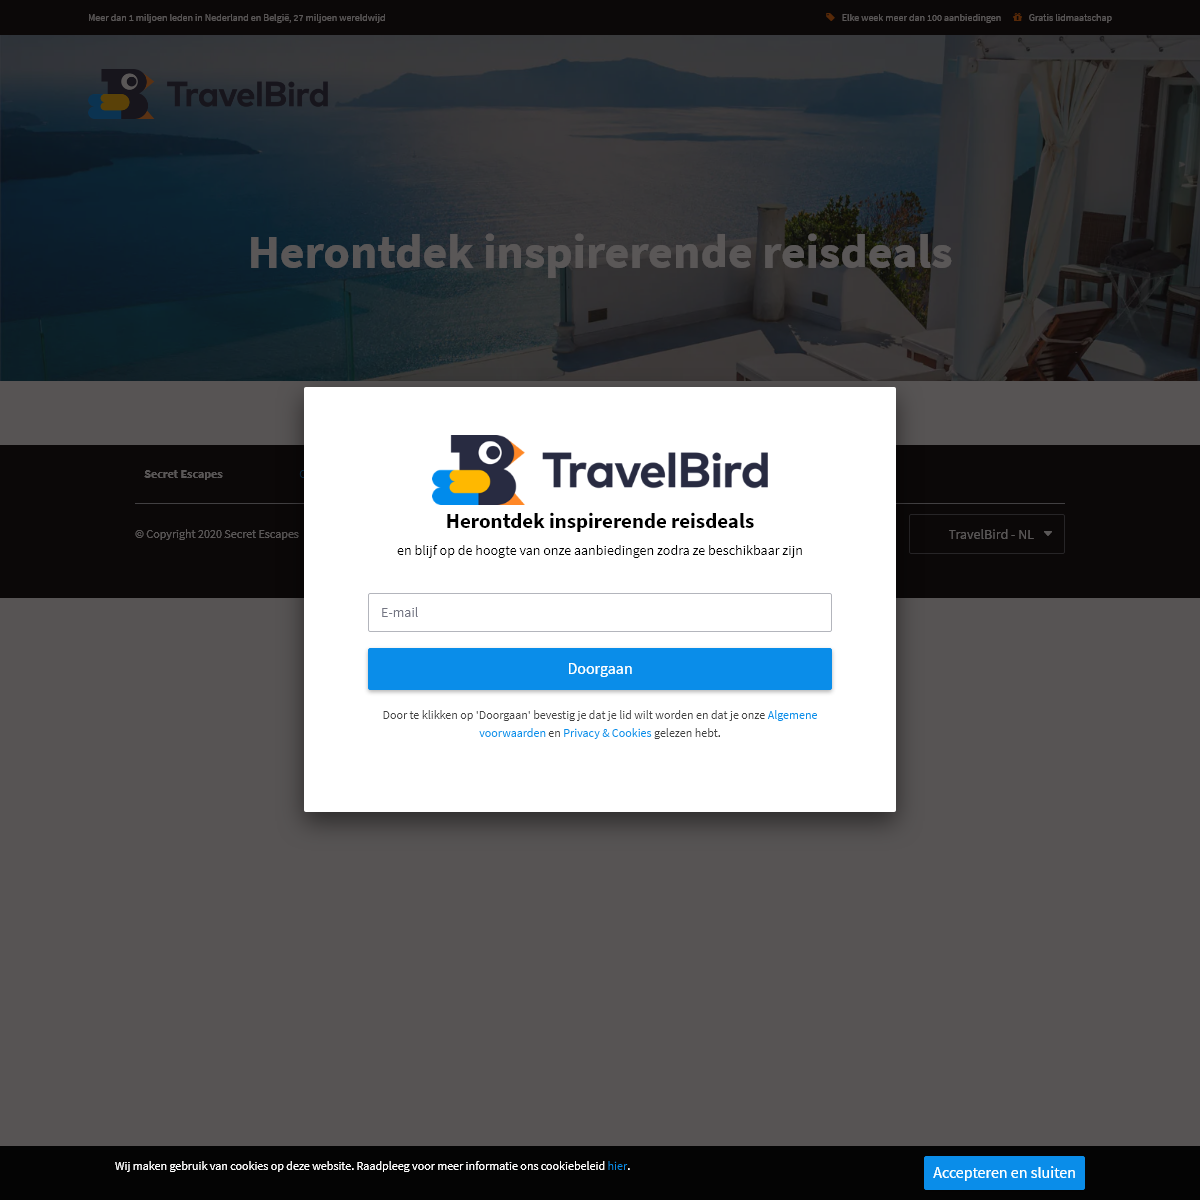 A complete backup of travelbird.nl